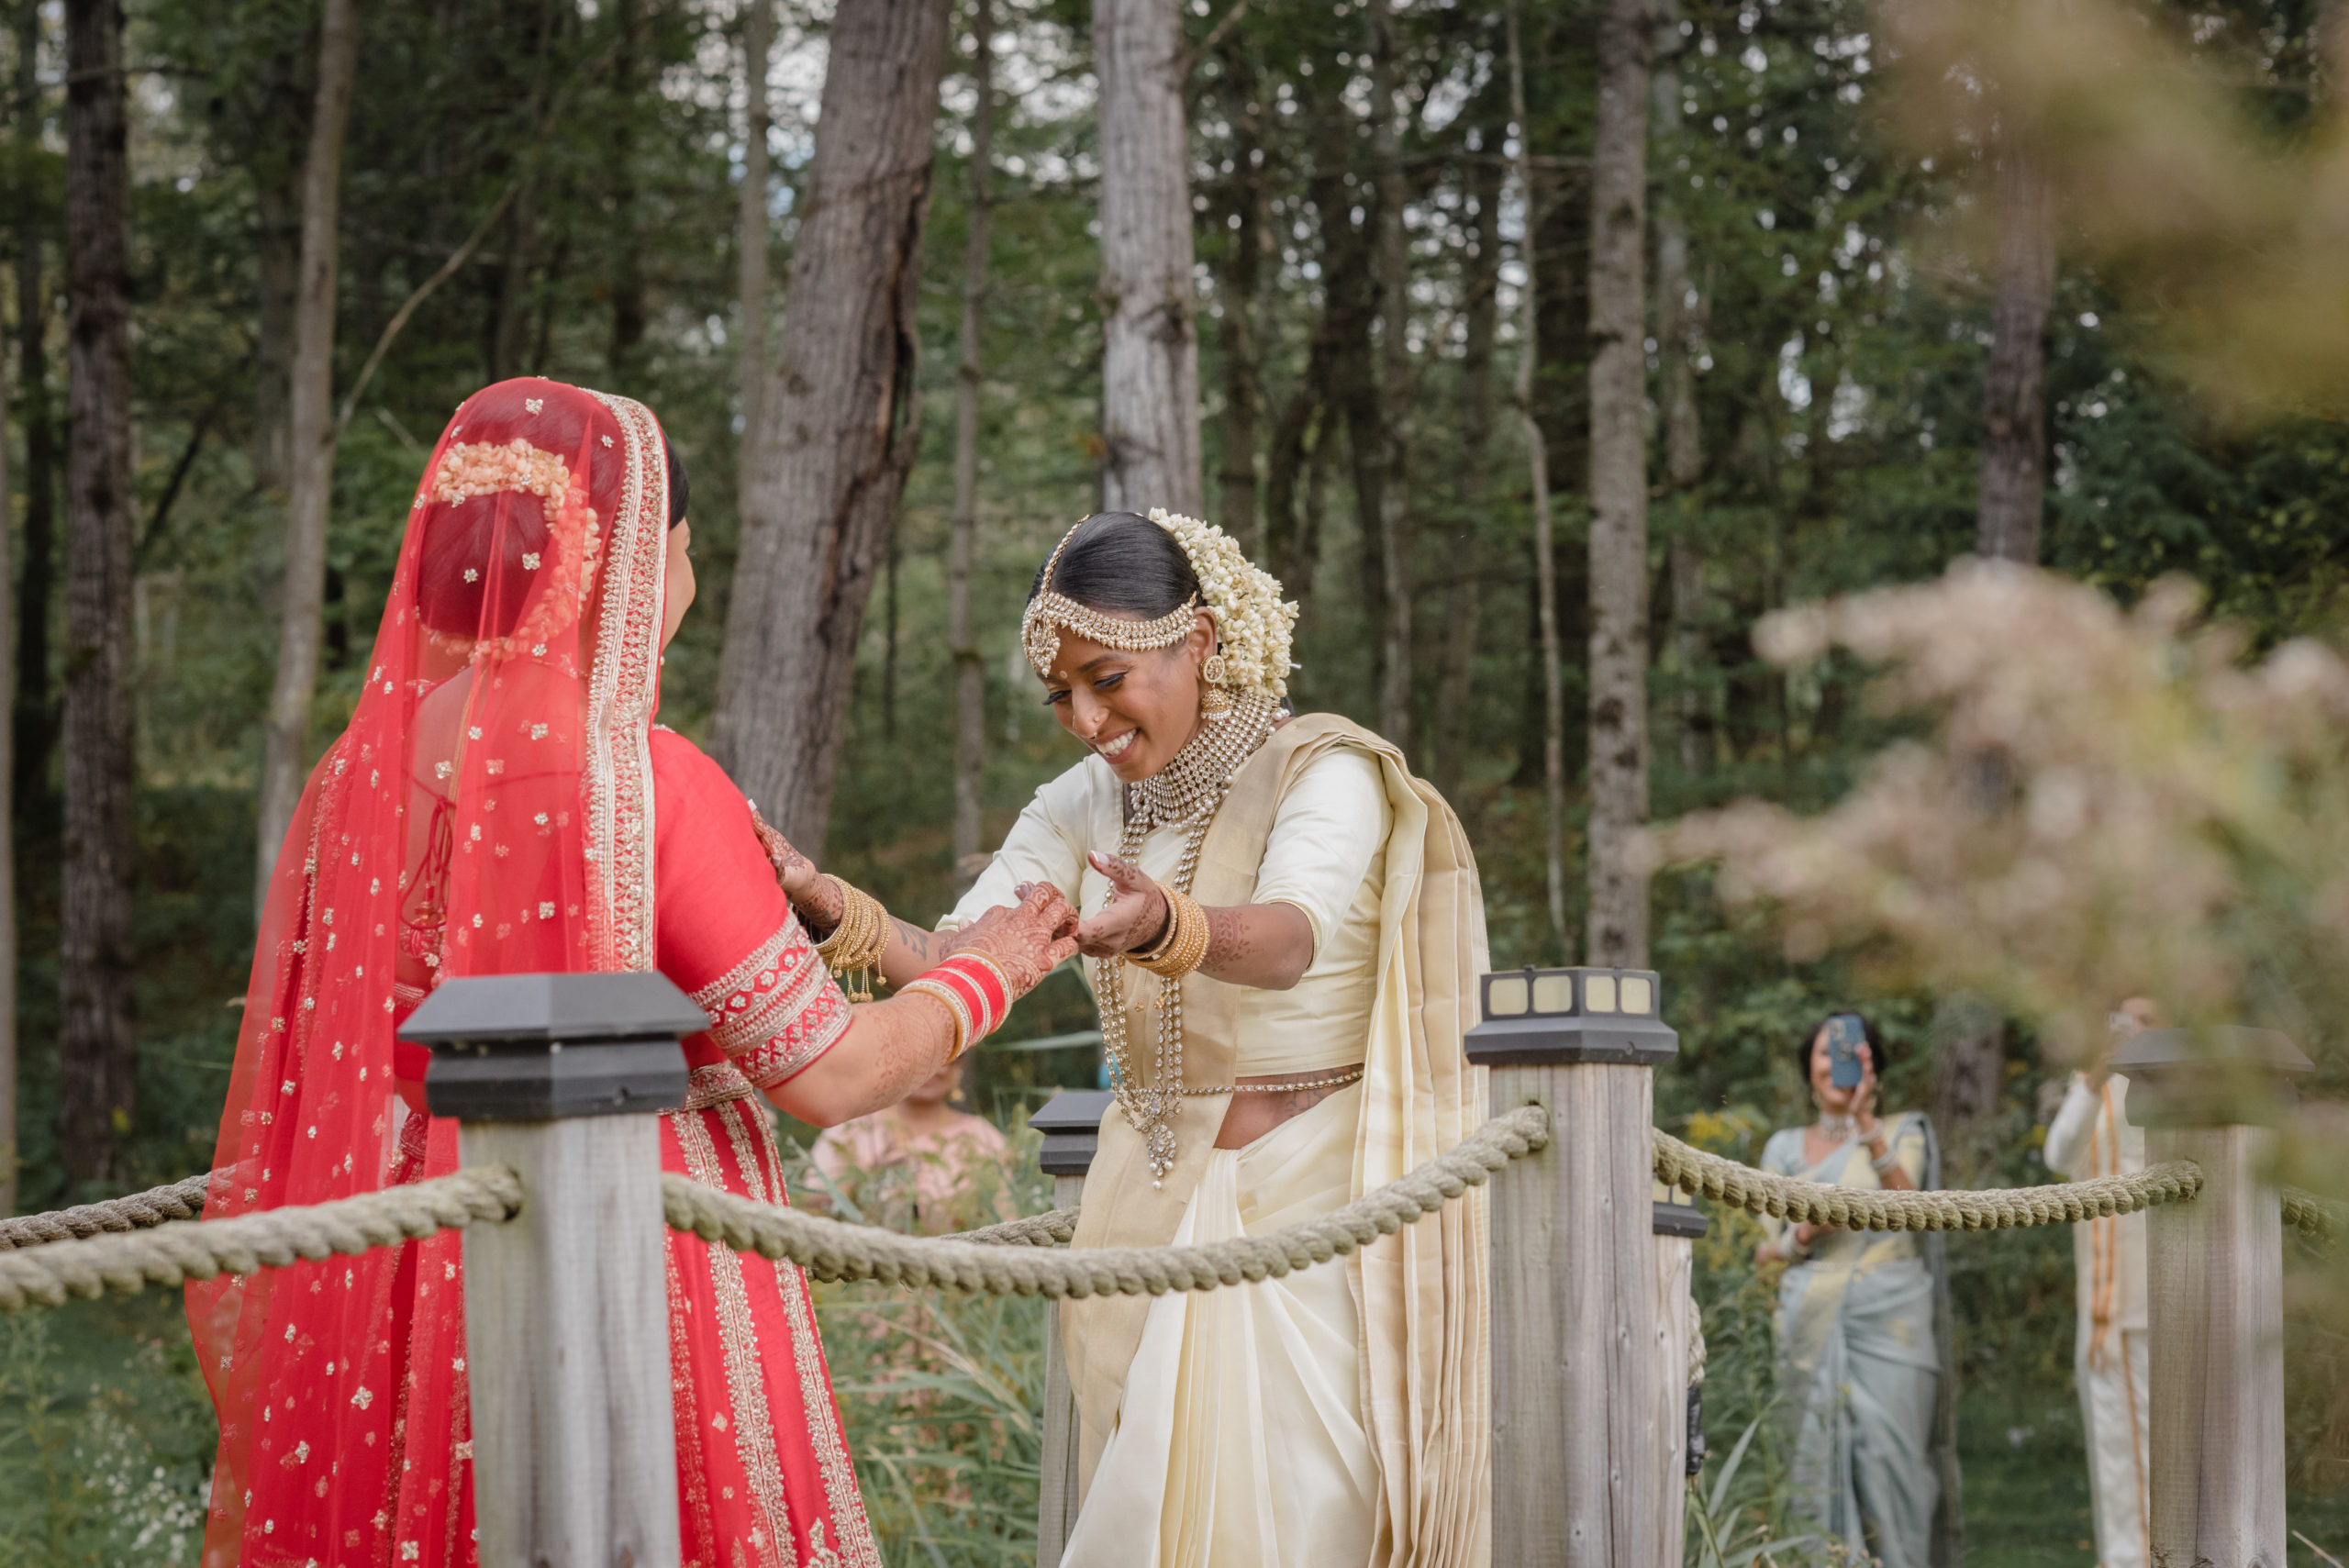 A pair of South Asian marriers stand on a footbridge, admiring each others' wedding attire. The one on the left is wearing red, and the one on the right is wearing tan and gold.